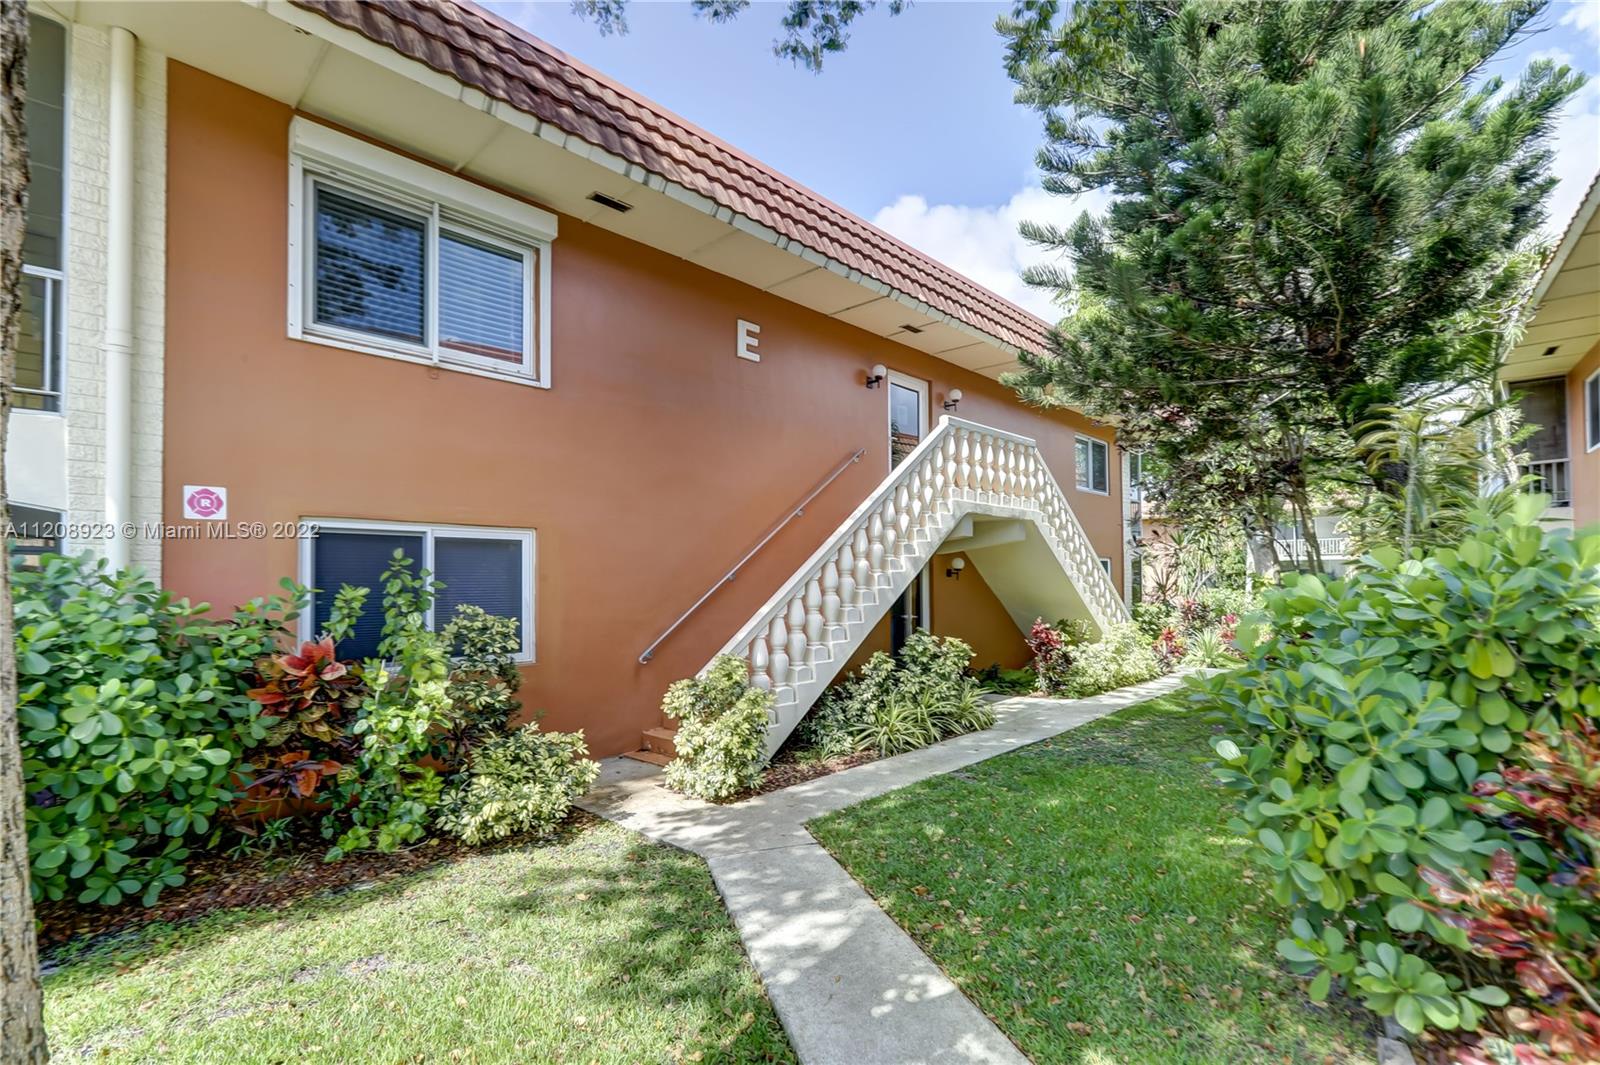 Best location in community.  Tucked away near great clubhouse, community pool, and river. Well maintained complex in the heart of Wilton Manors, AC replaced 2021.  One deeded parking space in addition to plenty of guest parking.  Walking distance to shops, dining, & bars on Wilton Drive. Minutes to Las Olas Blvd, downtown Fort Lauderdale, malls, airport, & close to major highways. Apprx 12 minutes from Fort Lauderdale Beach. Sold as is. Bldg has great reserves, therefore meets Fannie Mae guidelines. Unlike some other buildings in complex, this building has no land lease. Cats/Dogs under 20lbs​​‌​​​​‌​​‌‌​‌‌‌​​‌‌​‌‌‌​​‌‌​‌‌‌ allowed.